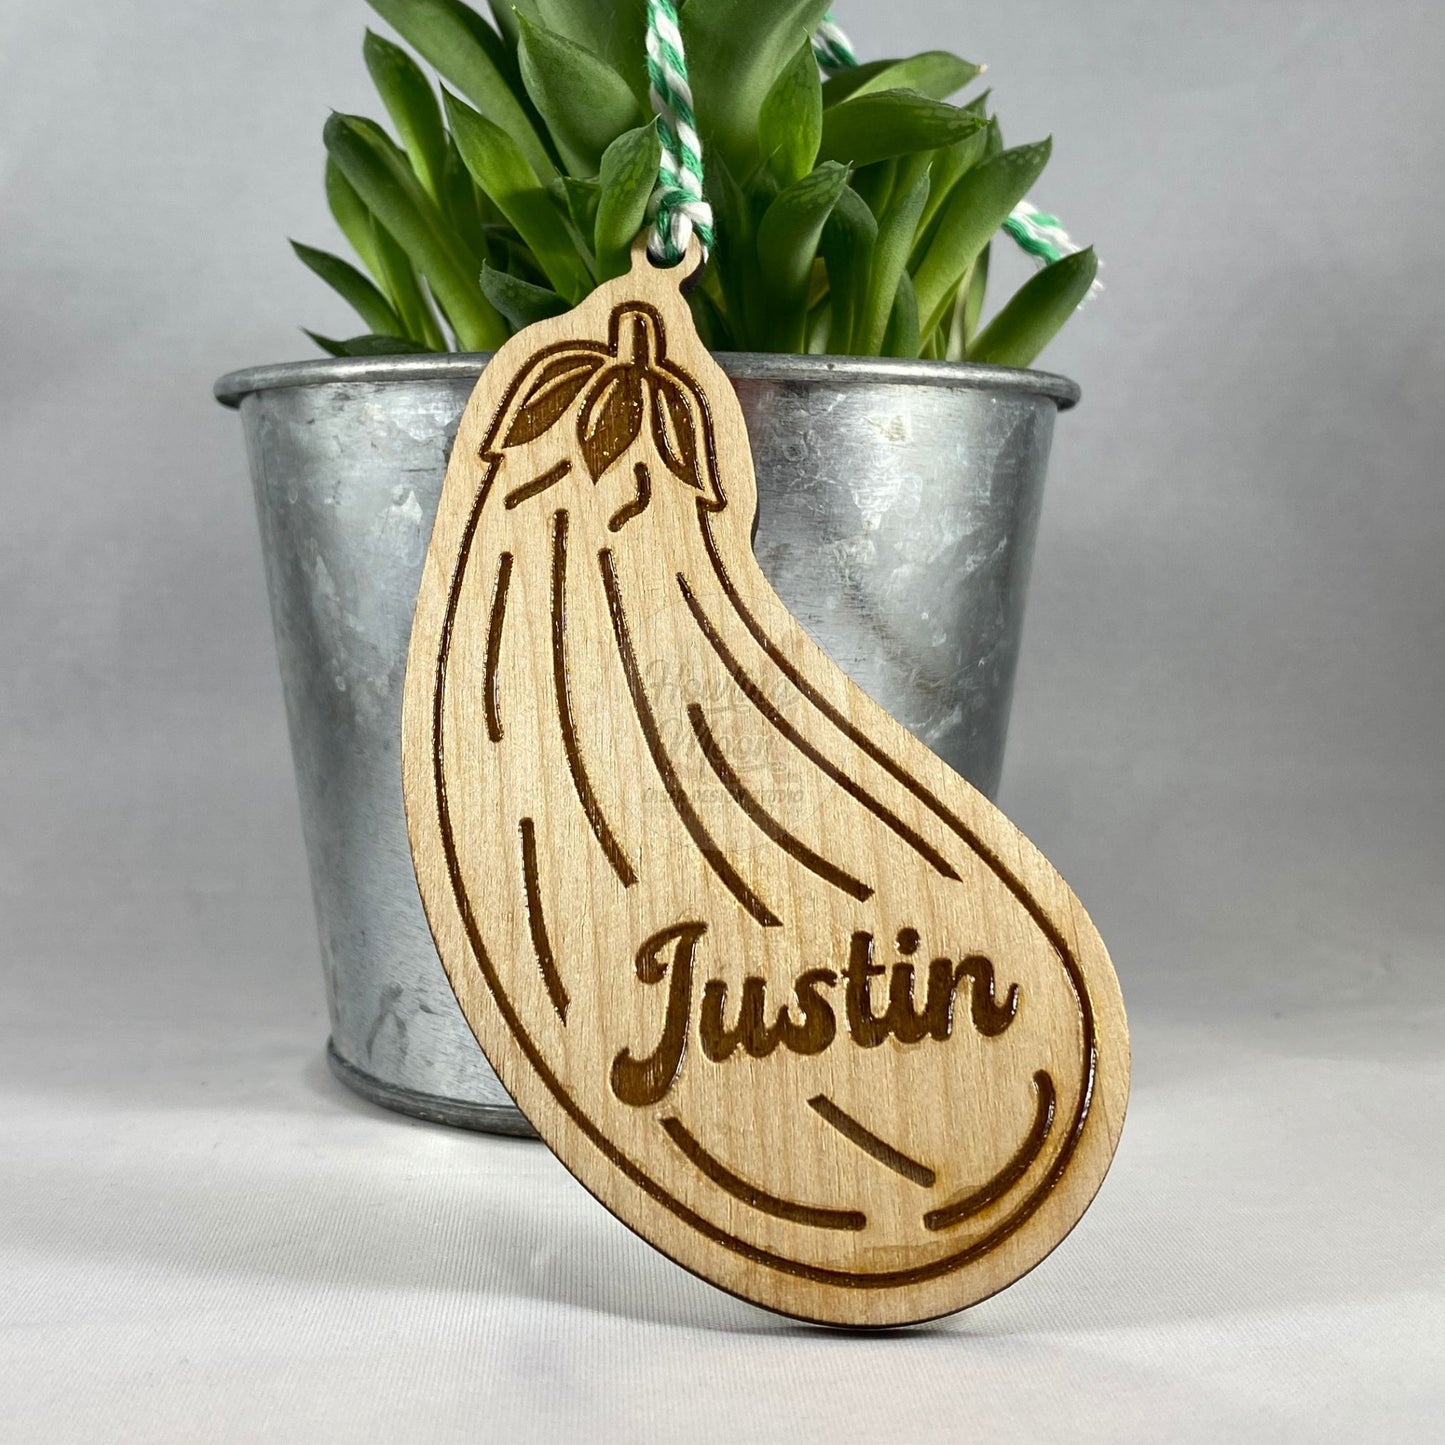 Beautiful Personalized eggplant ornament from Howling Moon Laser Design Studio in Virginia USA